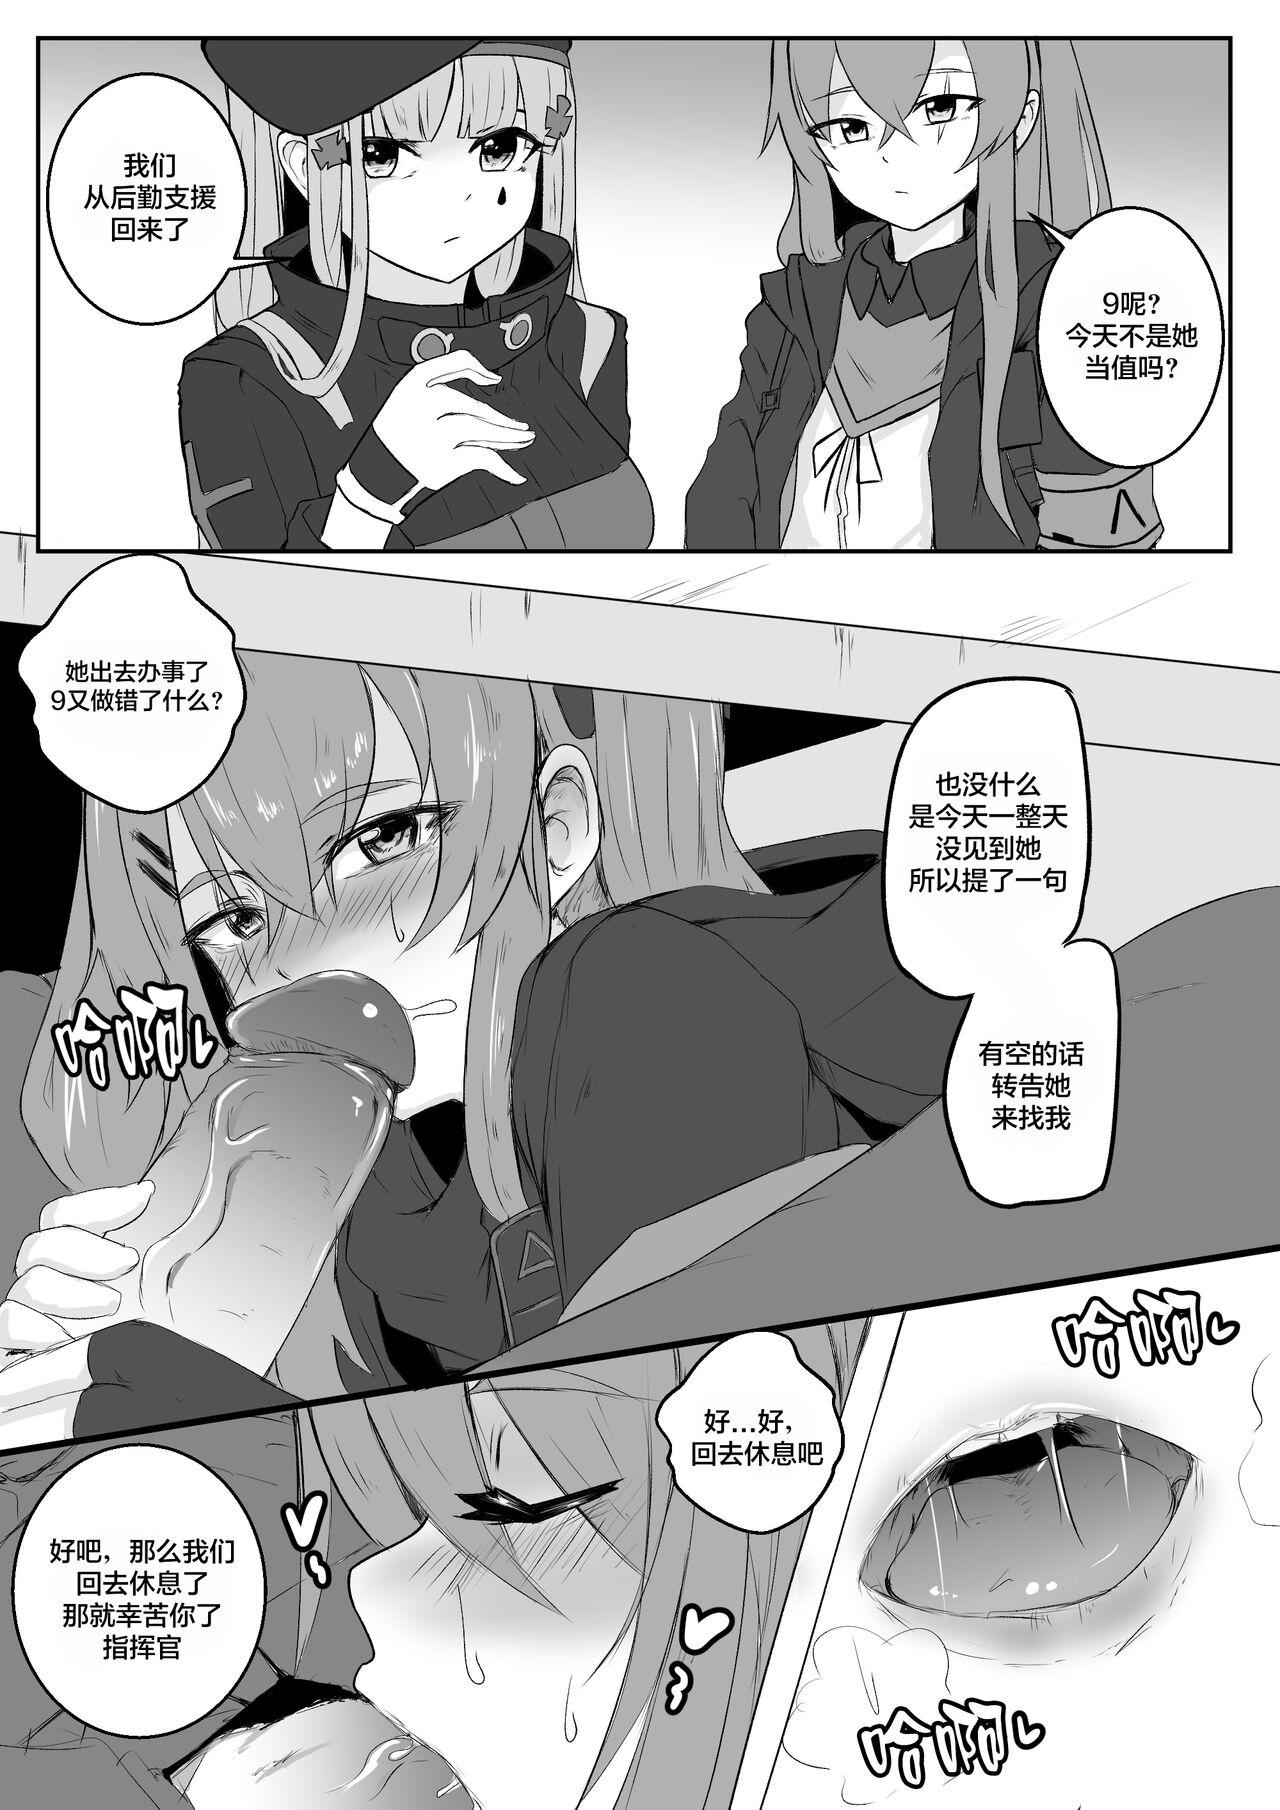 Leche UMP9, UMP45 - Girls frontline Spooning - Page 2